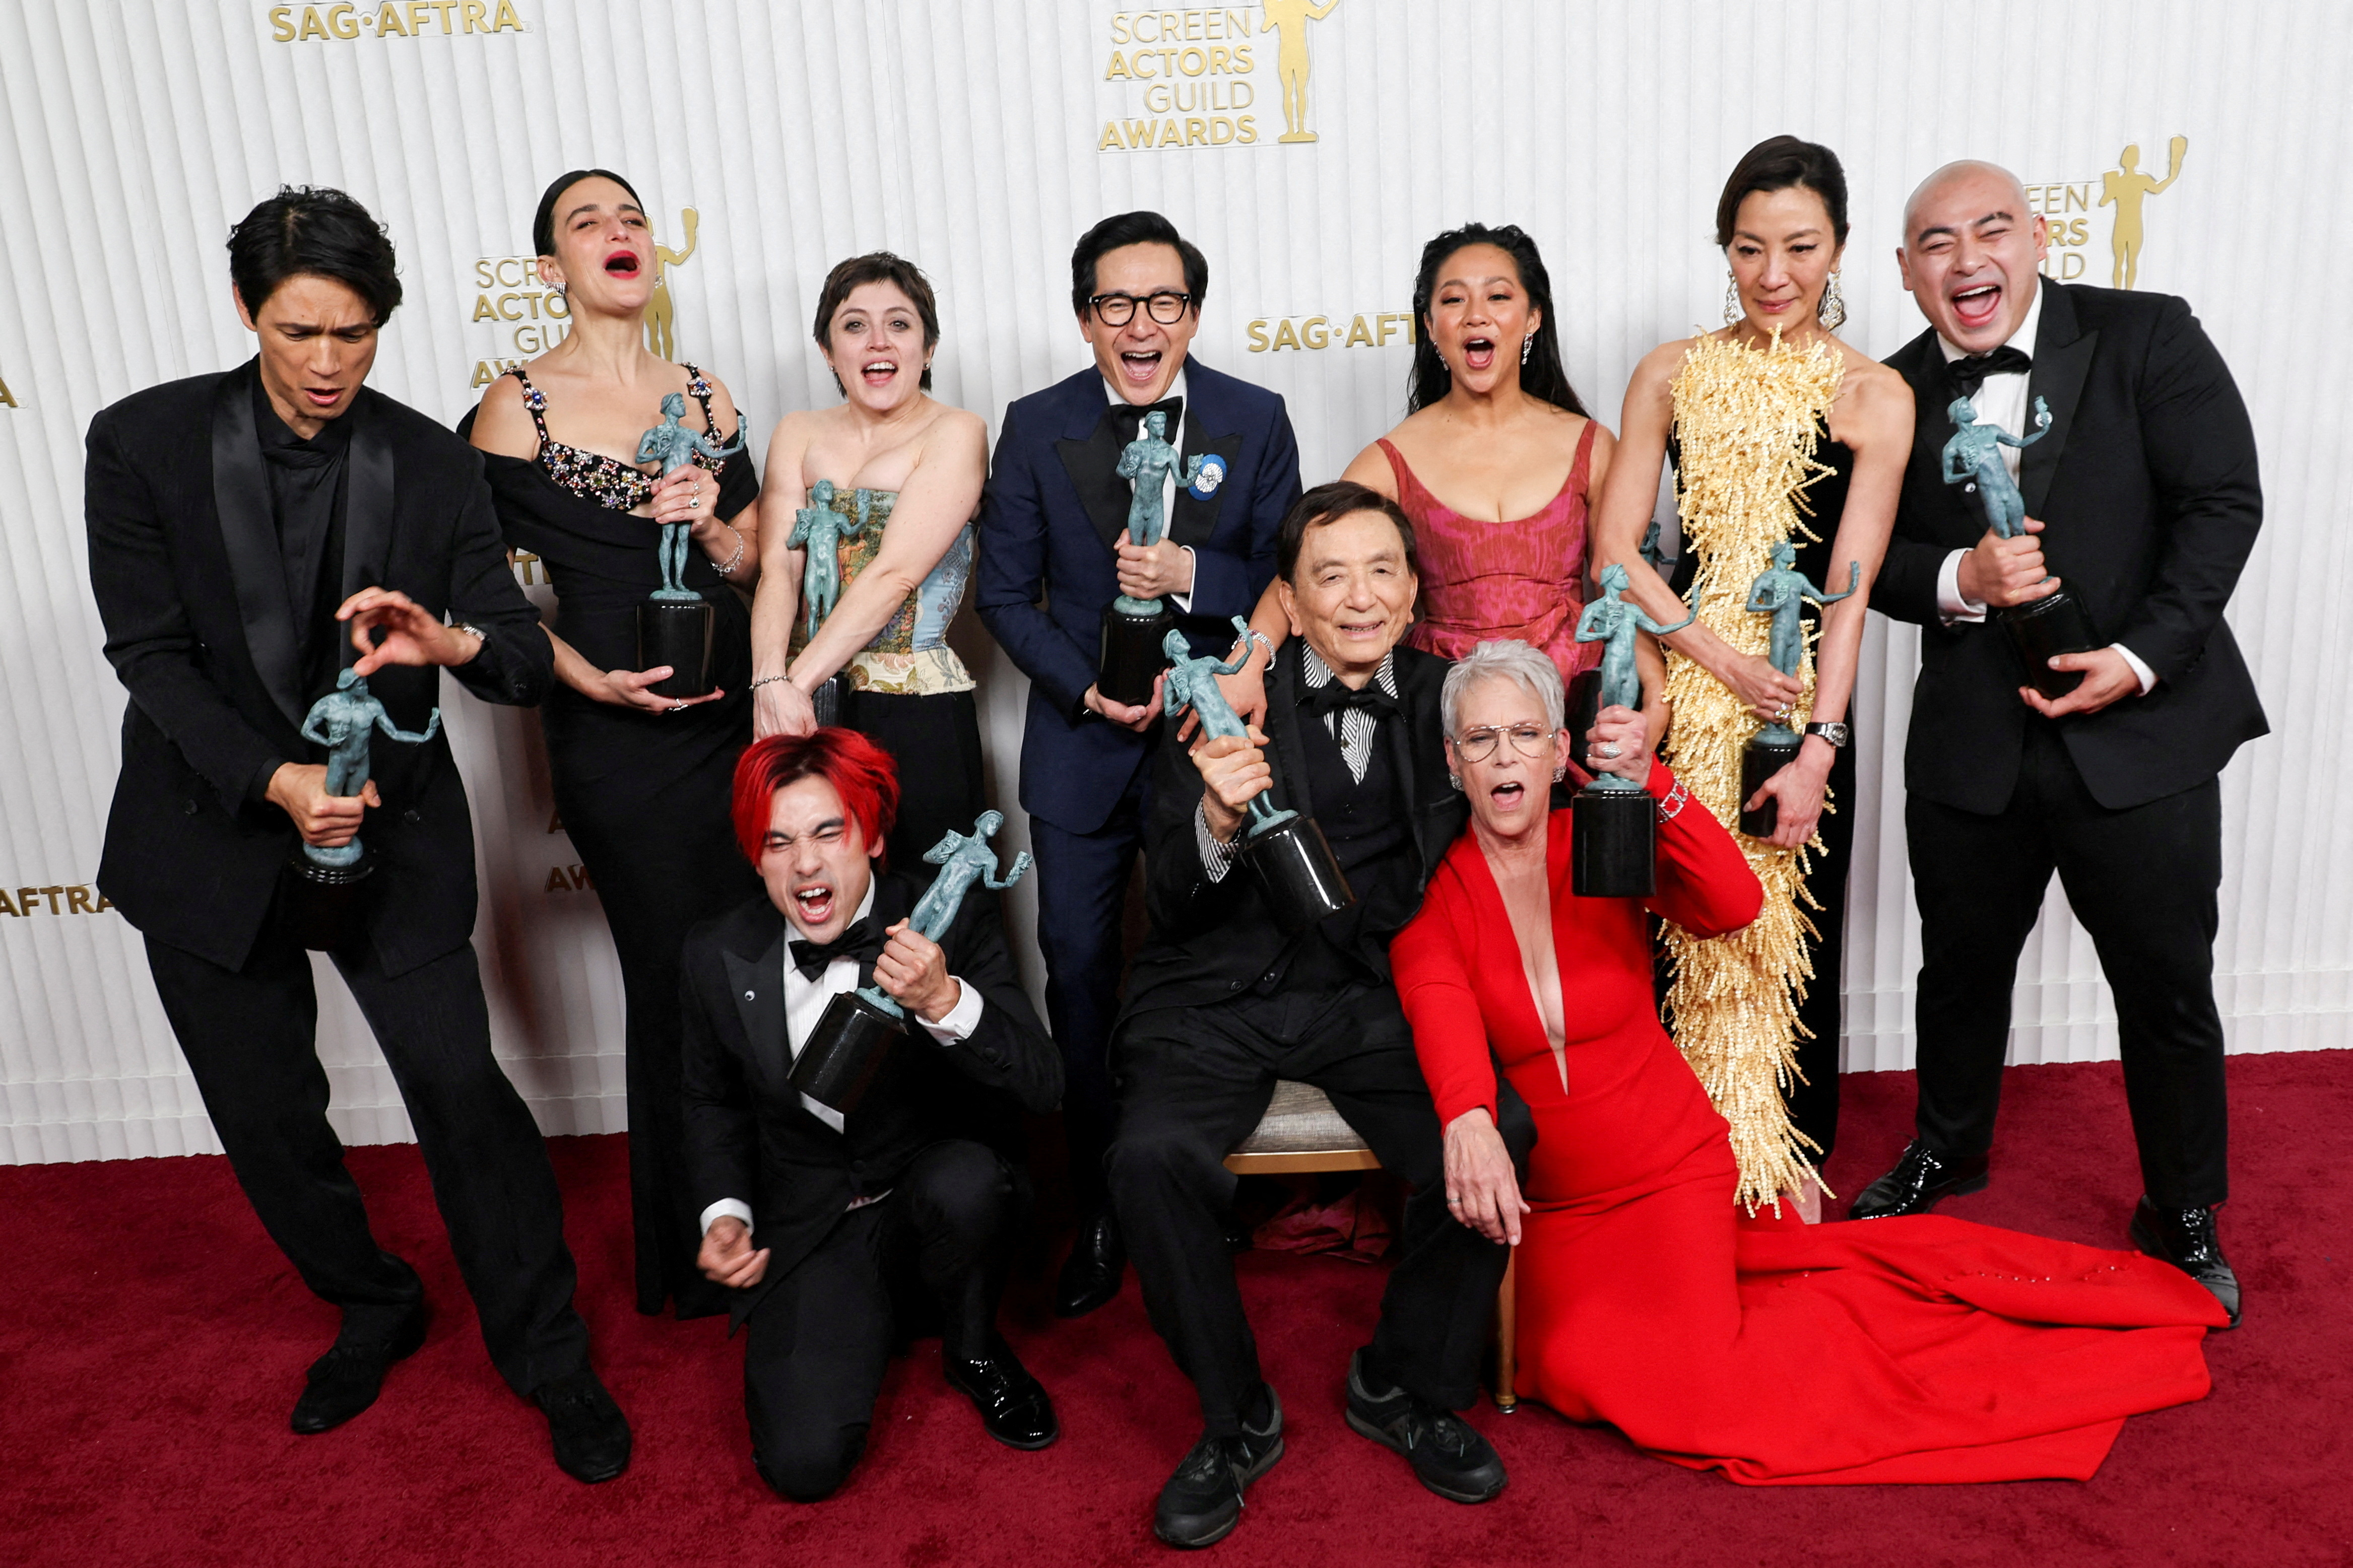 FILE PHOTO: Members of the cast of "Everything Everywhere All at Once" Harry Shum Jr., Jenny Slate, Andy Le, Tallie Medel, Ke Huy Quan, James Hong, Stephanie Hsu, Jamie Lee Curtis, Michelle Yeoh and Brian Le, pose with the award for Outstanding Performance by a Cast in a Motion Picture during the 29th Screen Actors Guild Awards at the Fairmont Century Plaza Hotel in Los Angeles, California, U.S., February 26, 2023. REUTERS/Aude Guerrucci/File Photo/File Photo